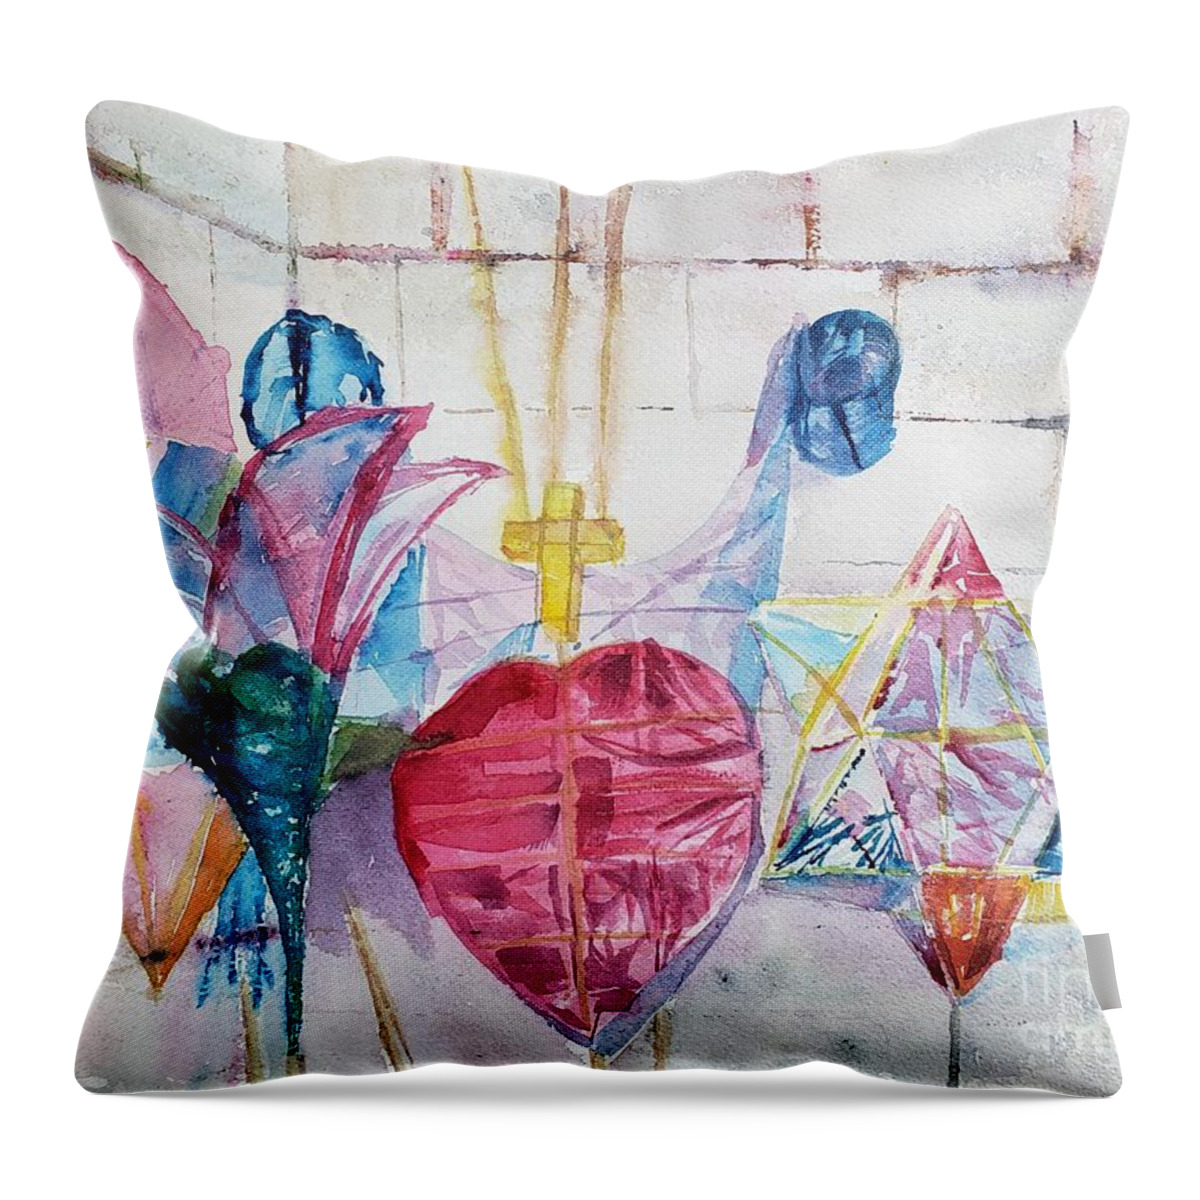 Papalote Del Fiesta Throw Pillow featuring the painting Papalote del fiesta by Lisa Debaets